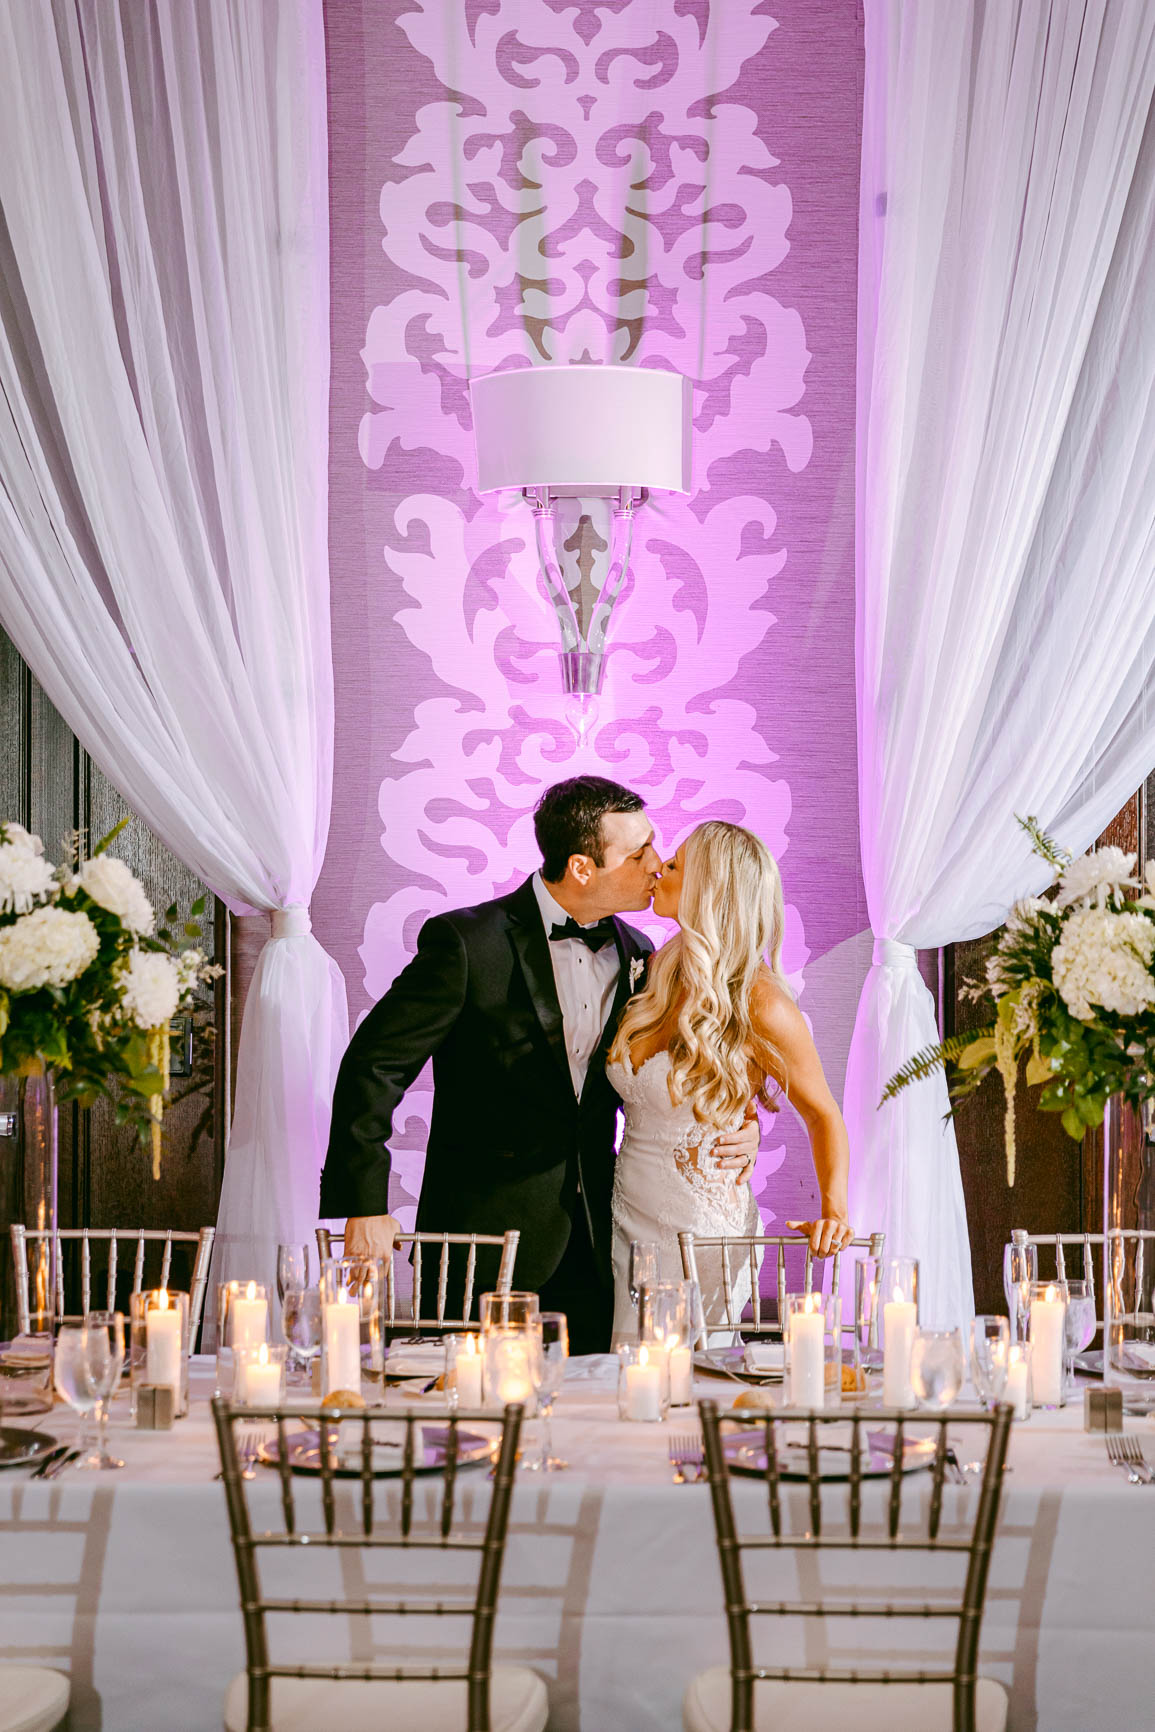 Kimpton Tryon park hotel wedding reception in Charlotte nc by Nhieu Tang Photography | nhieutang.com